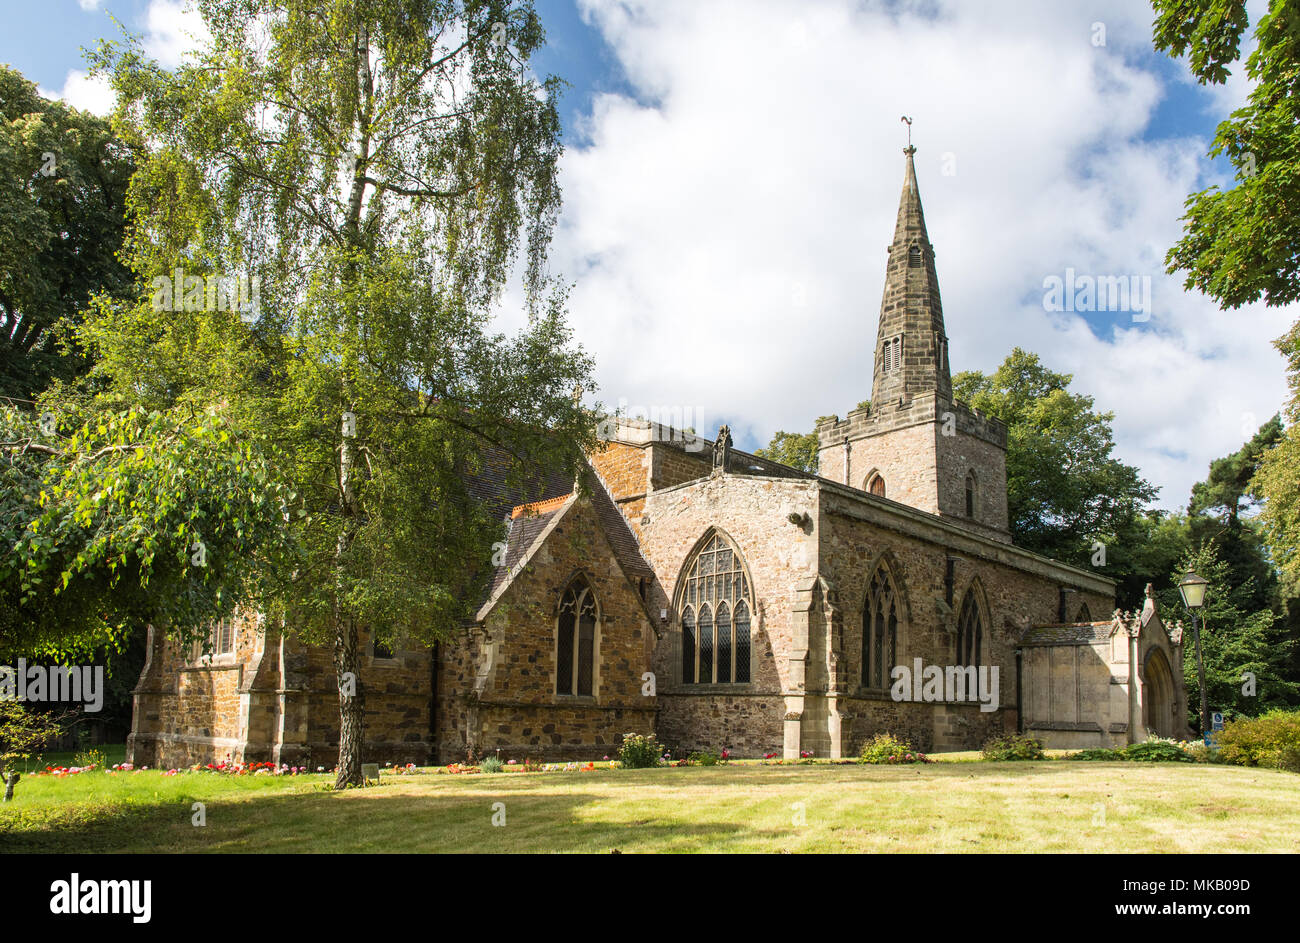 Leicester, England, UK - September 5, 2017: Sun shines on the traditional parish church and spire of St Denys in Evington in Leicester. Stock Photo